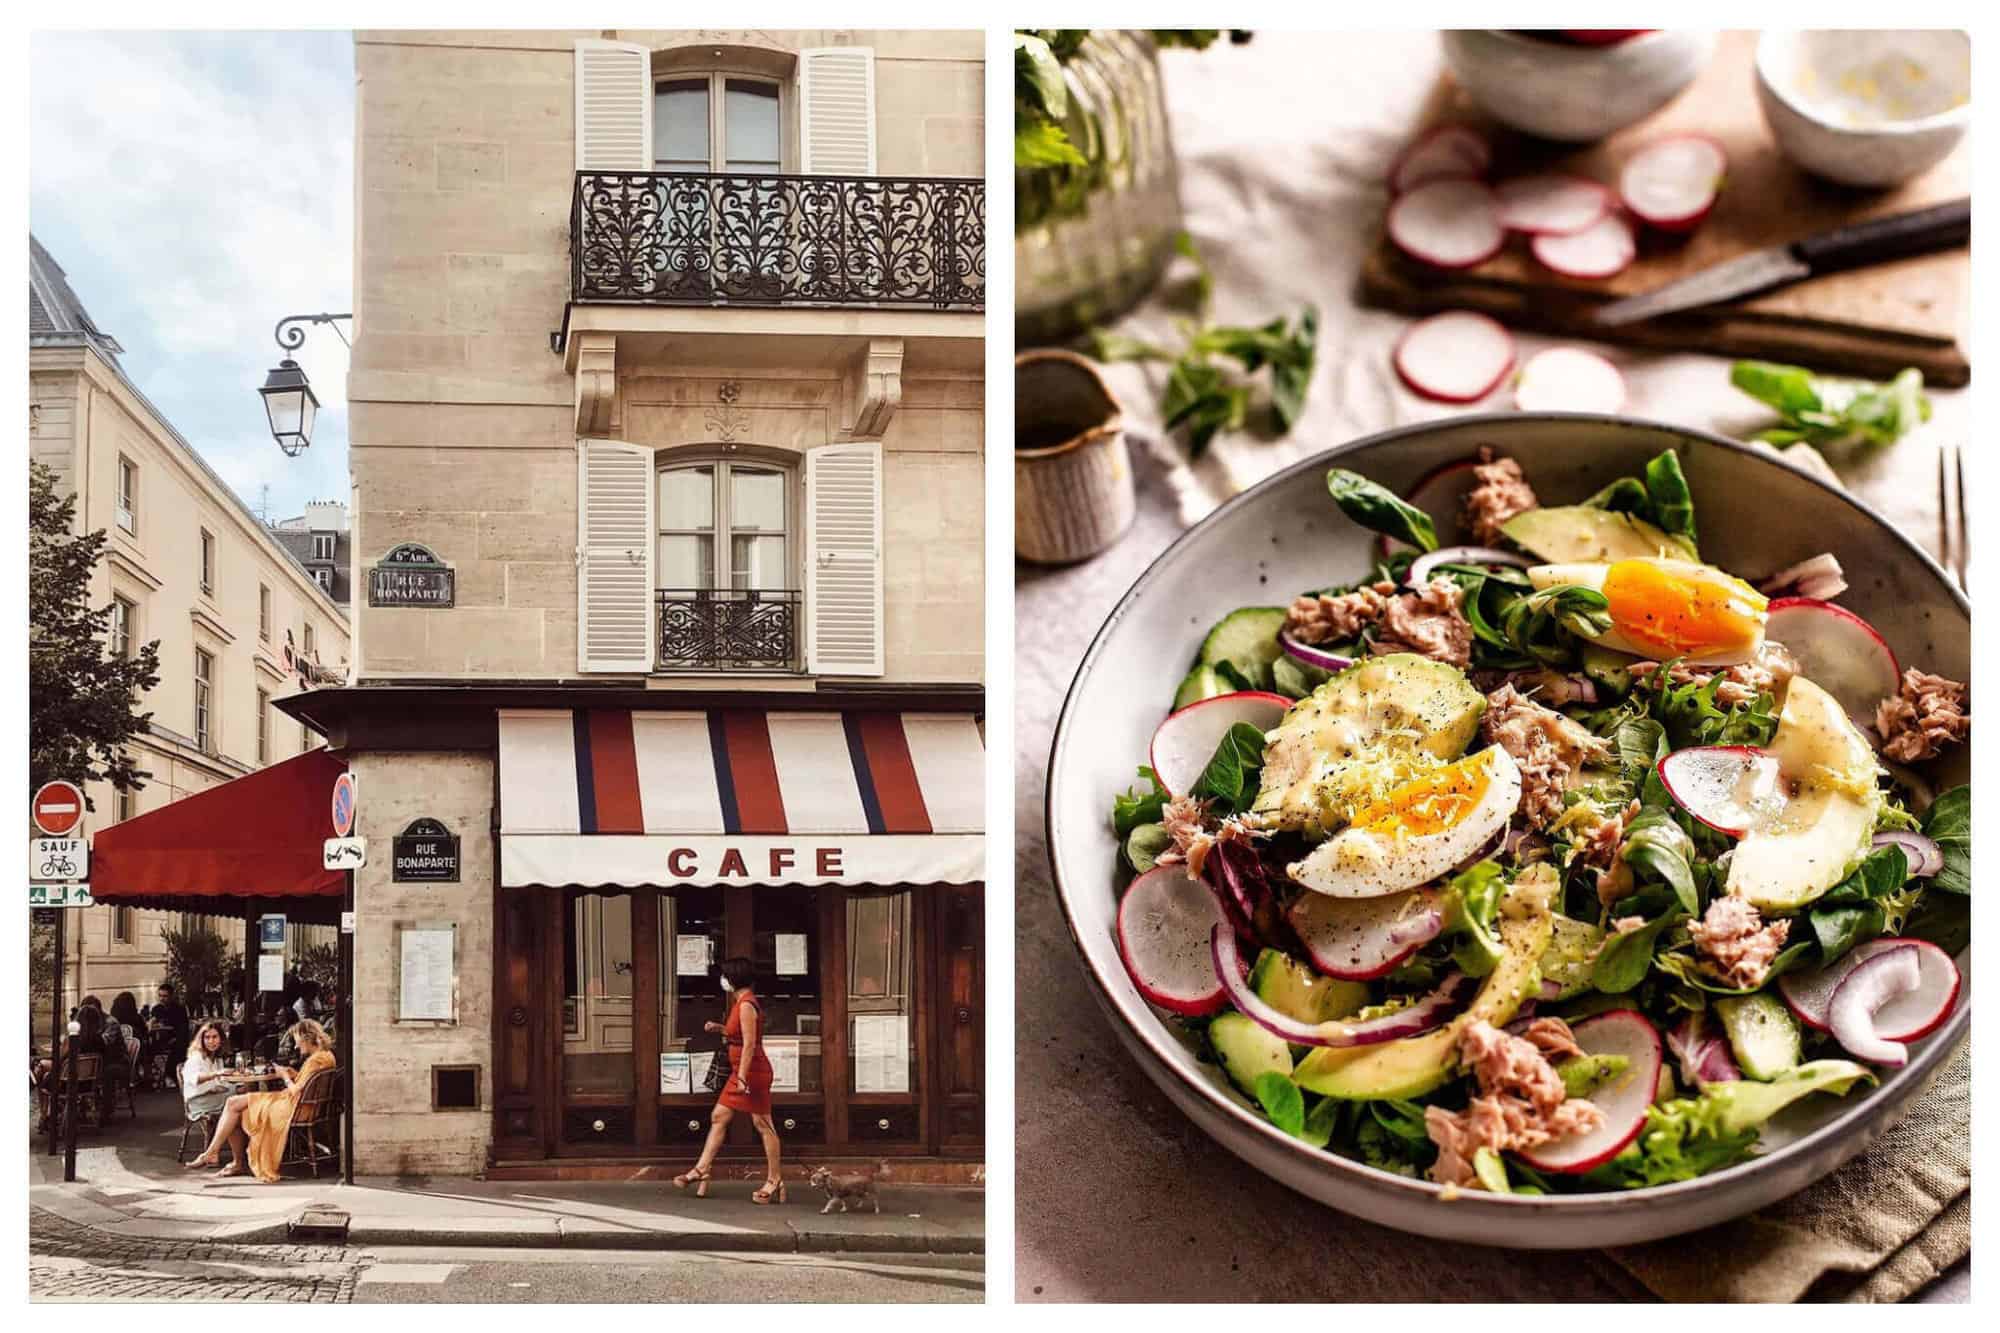 Left: a photo of a corner bistro in Paris. Right: a photo of a green salad with eggs in a bowl